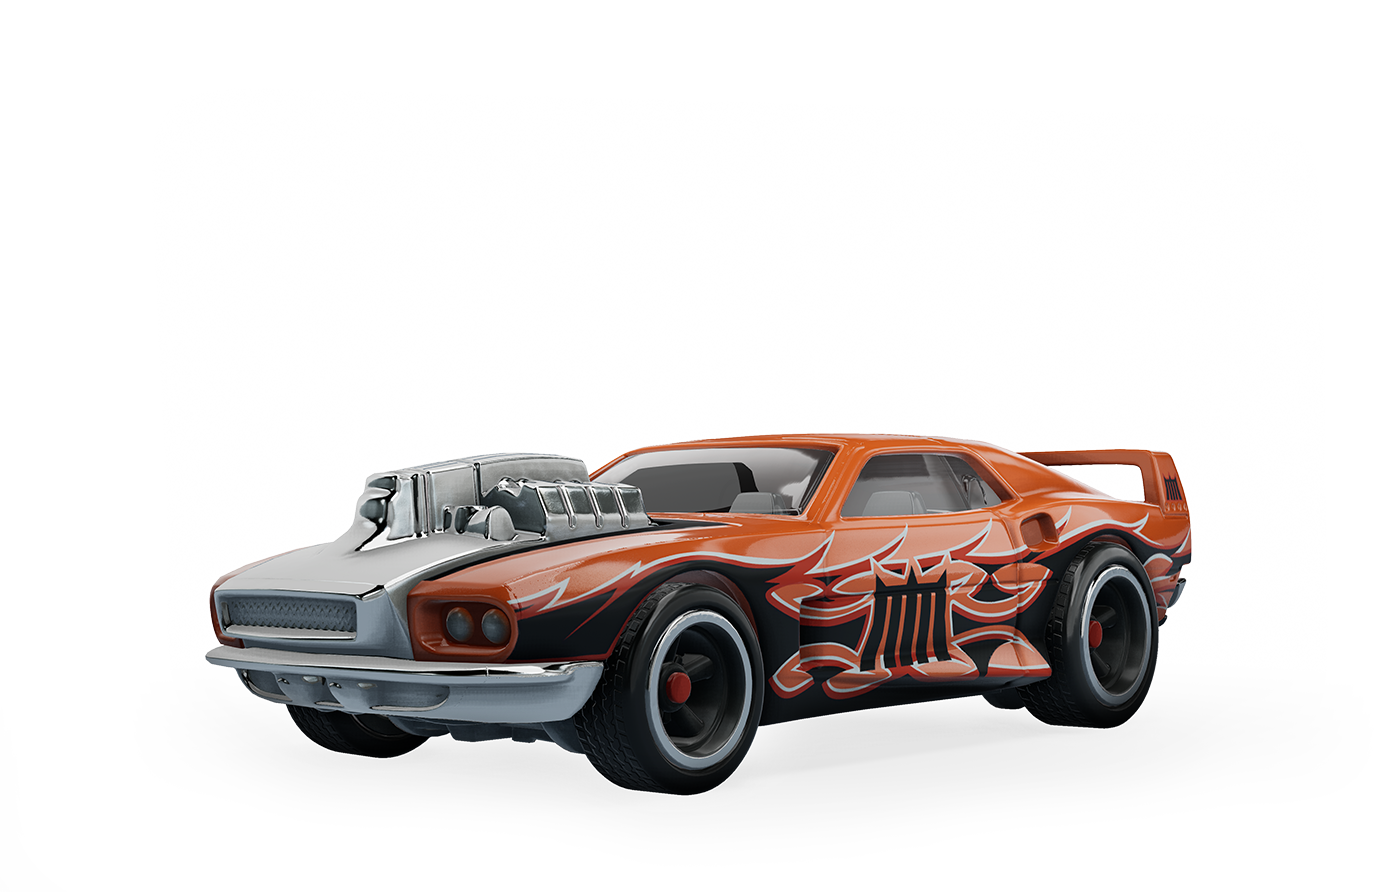 HOT WHEELS™ - Fun Pack for Free - Epic Games Store